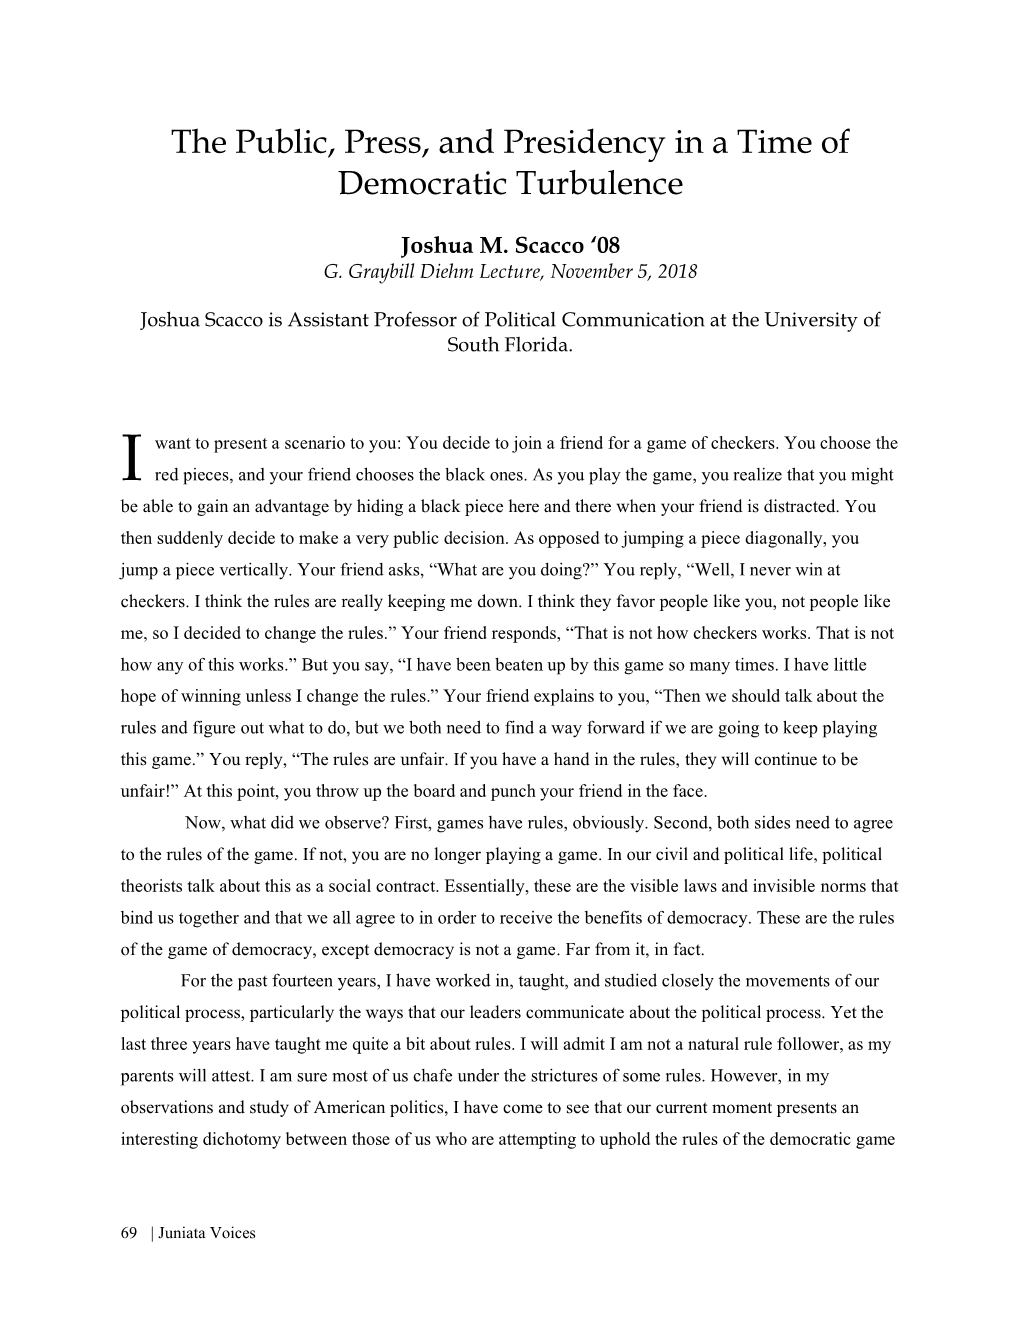 The Public, Press, and Presidency in a Time of Democratic Turbulence